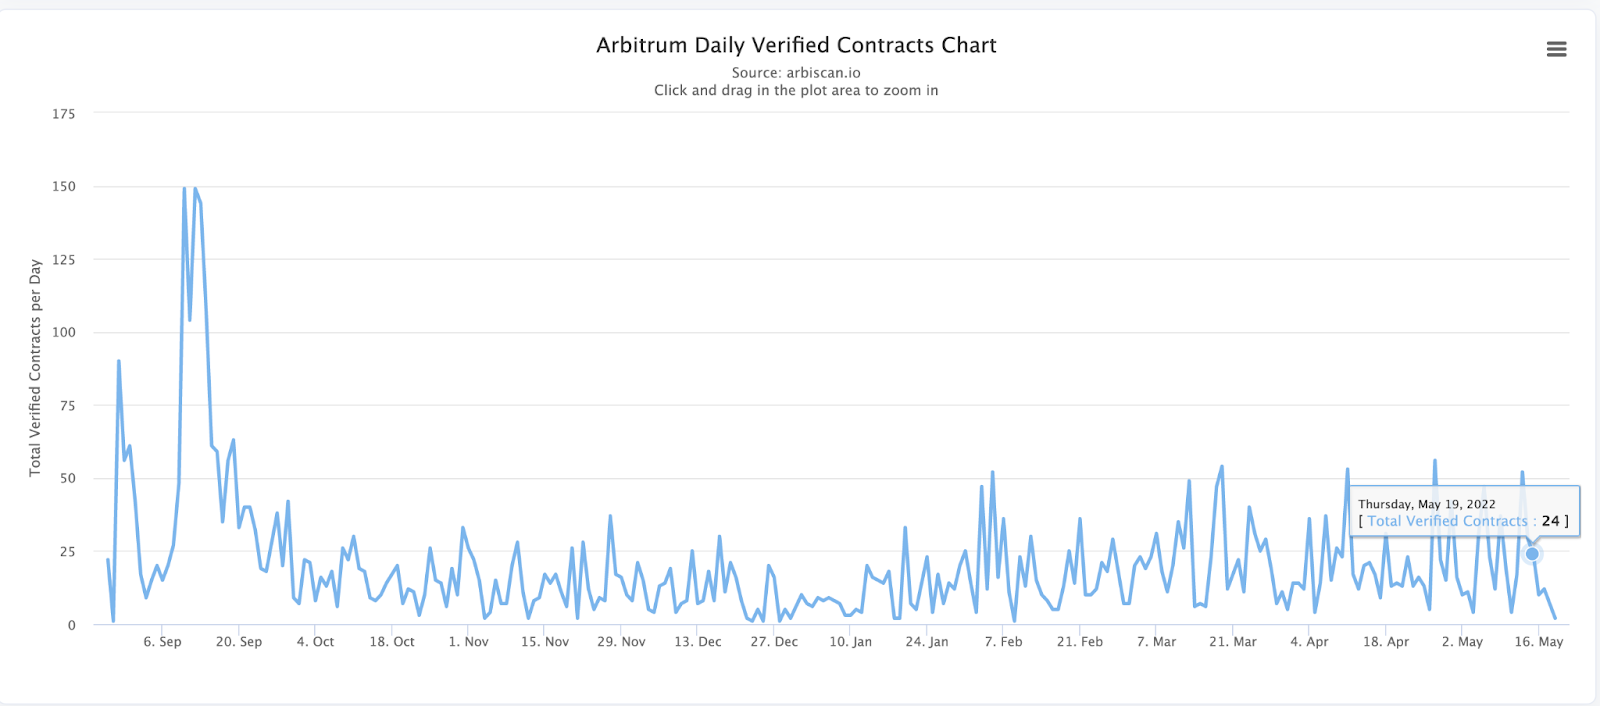 Arbitrum Daily Verified Contracts Chart